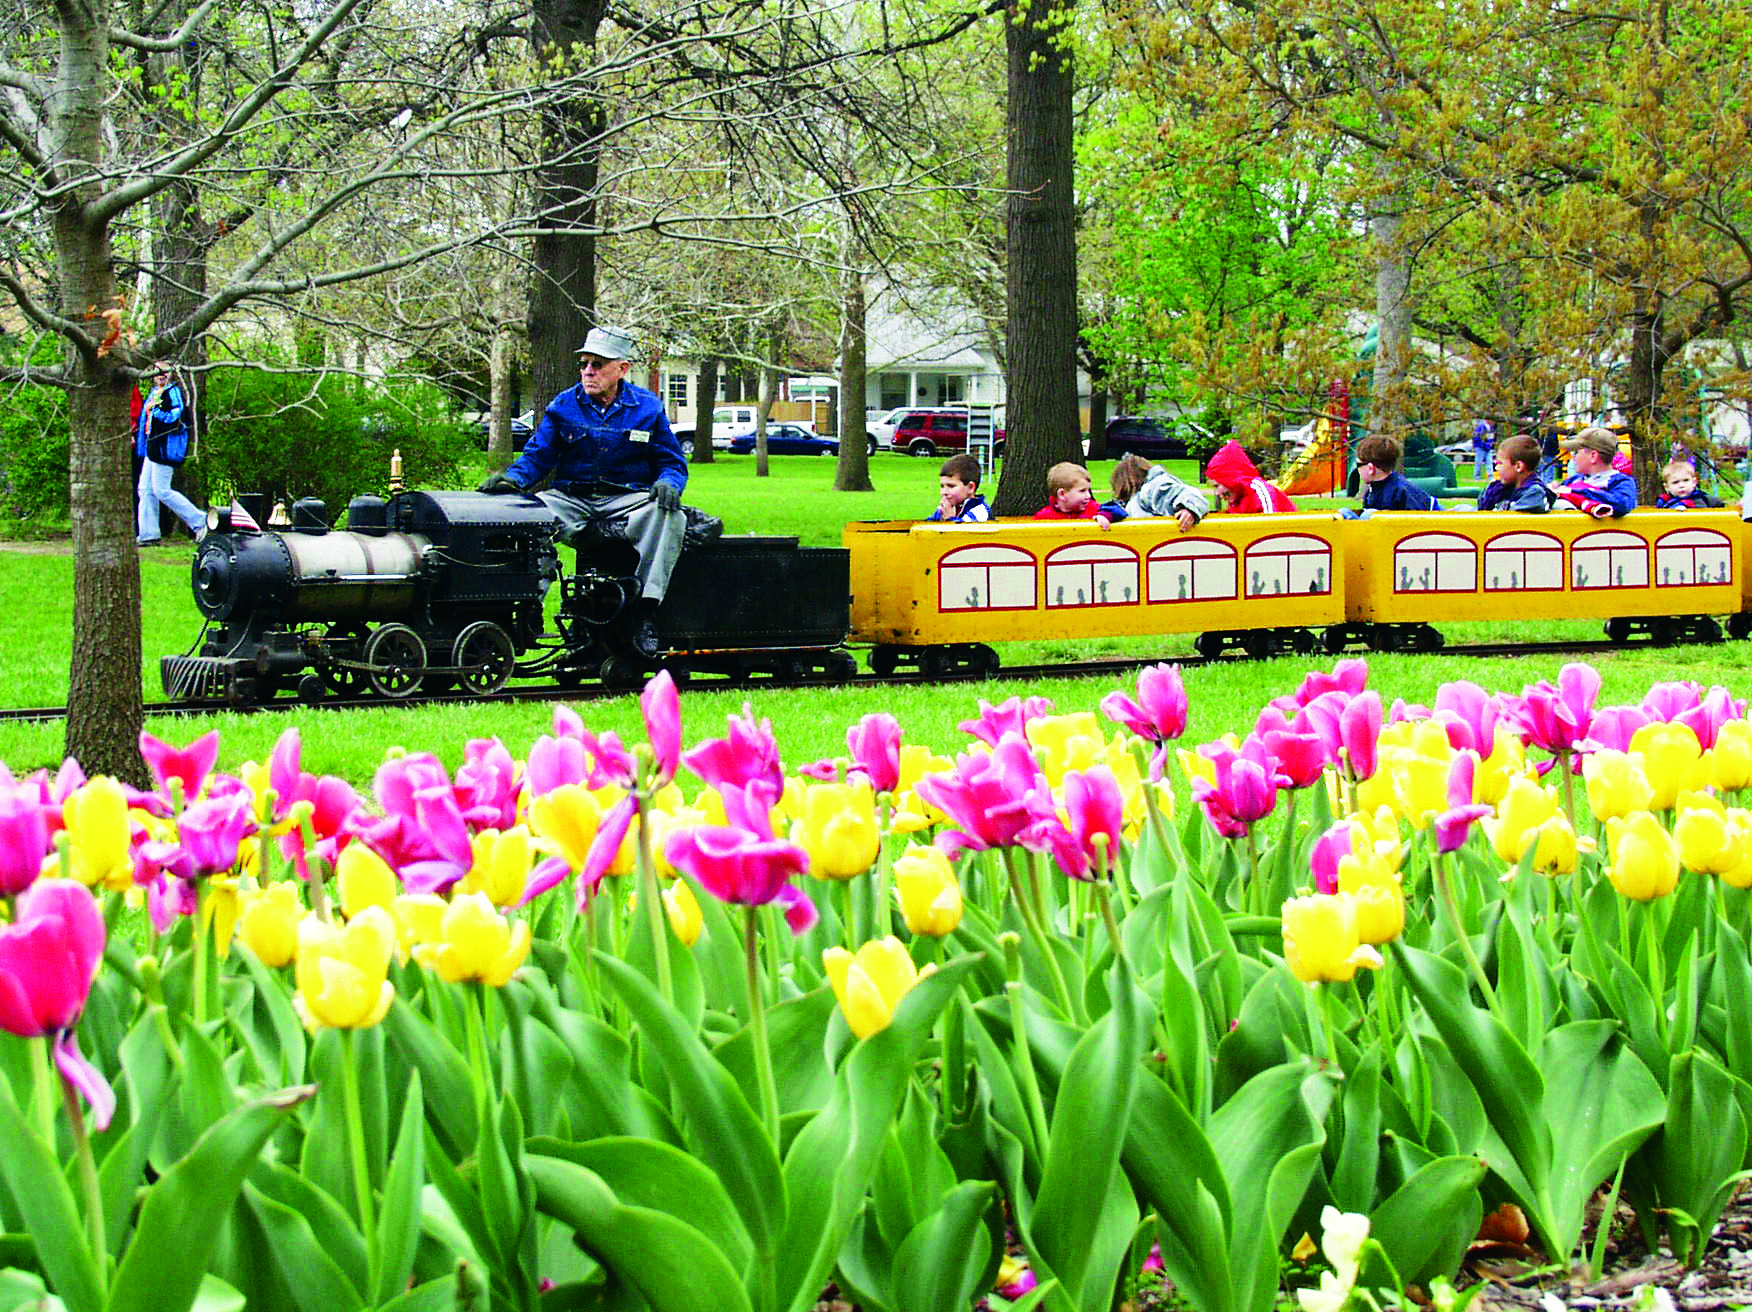 Photo of the train in City Park